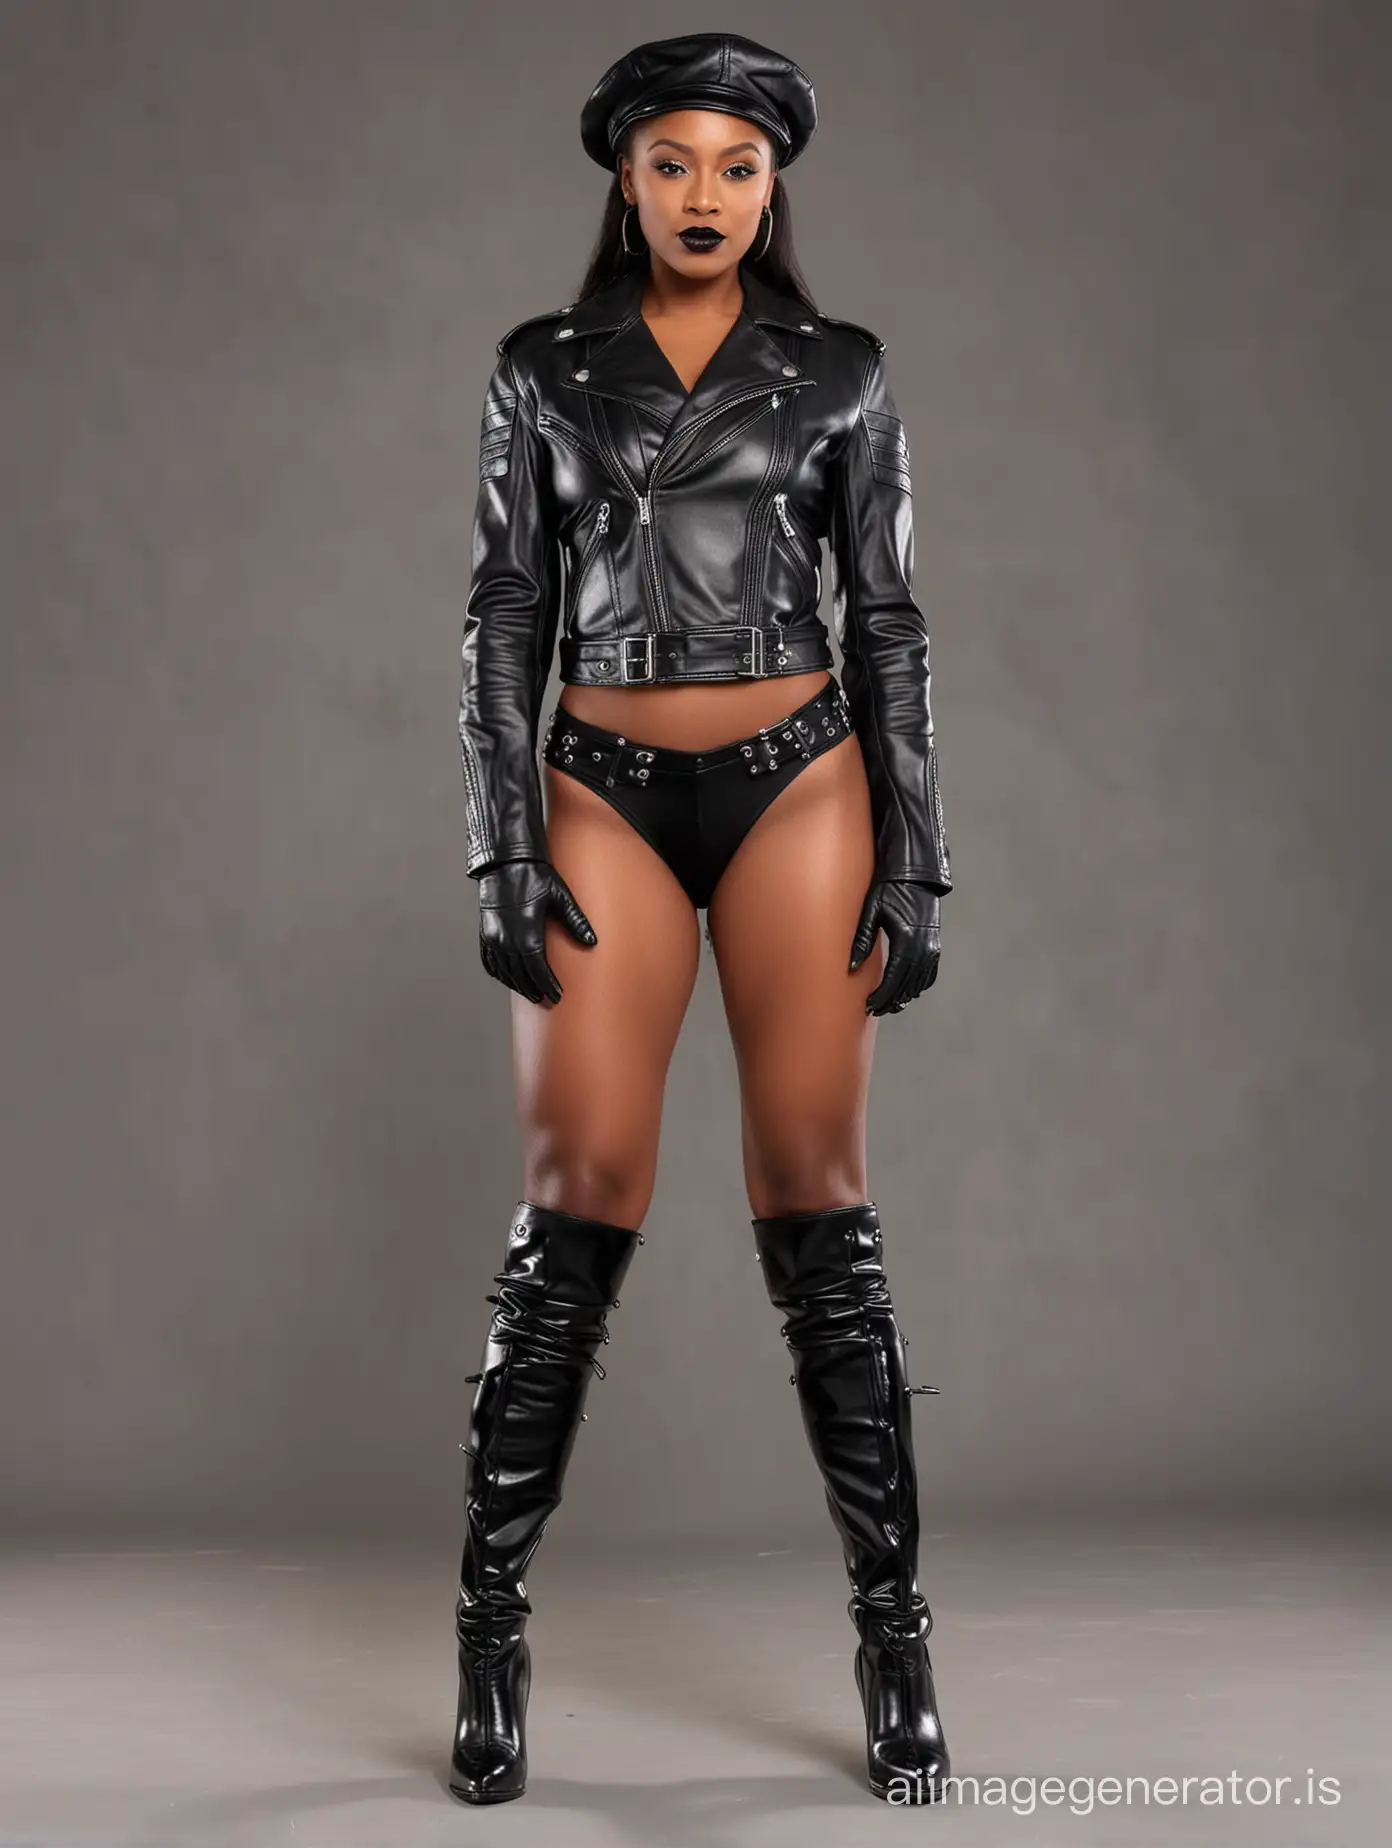 Stylish-Ebony-Woman-in-Edgy-Leather-Ensemble-and-Boots